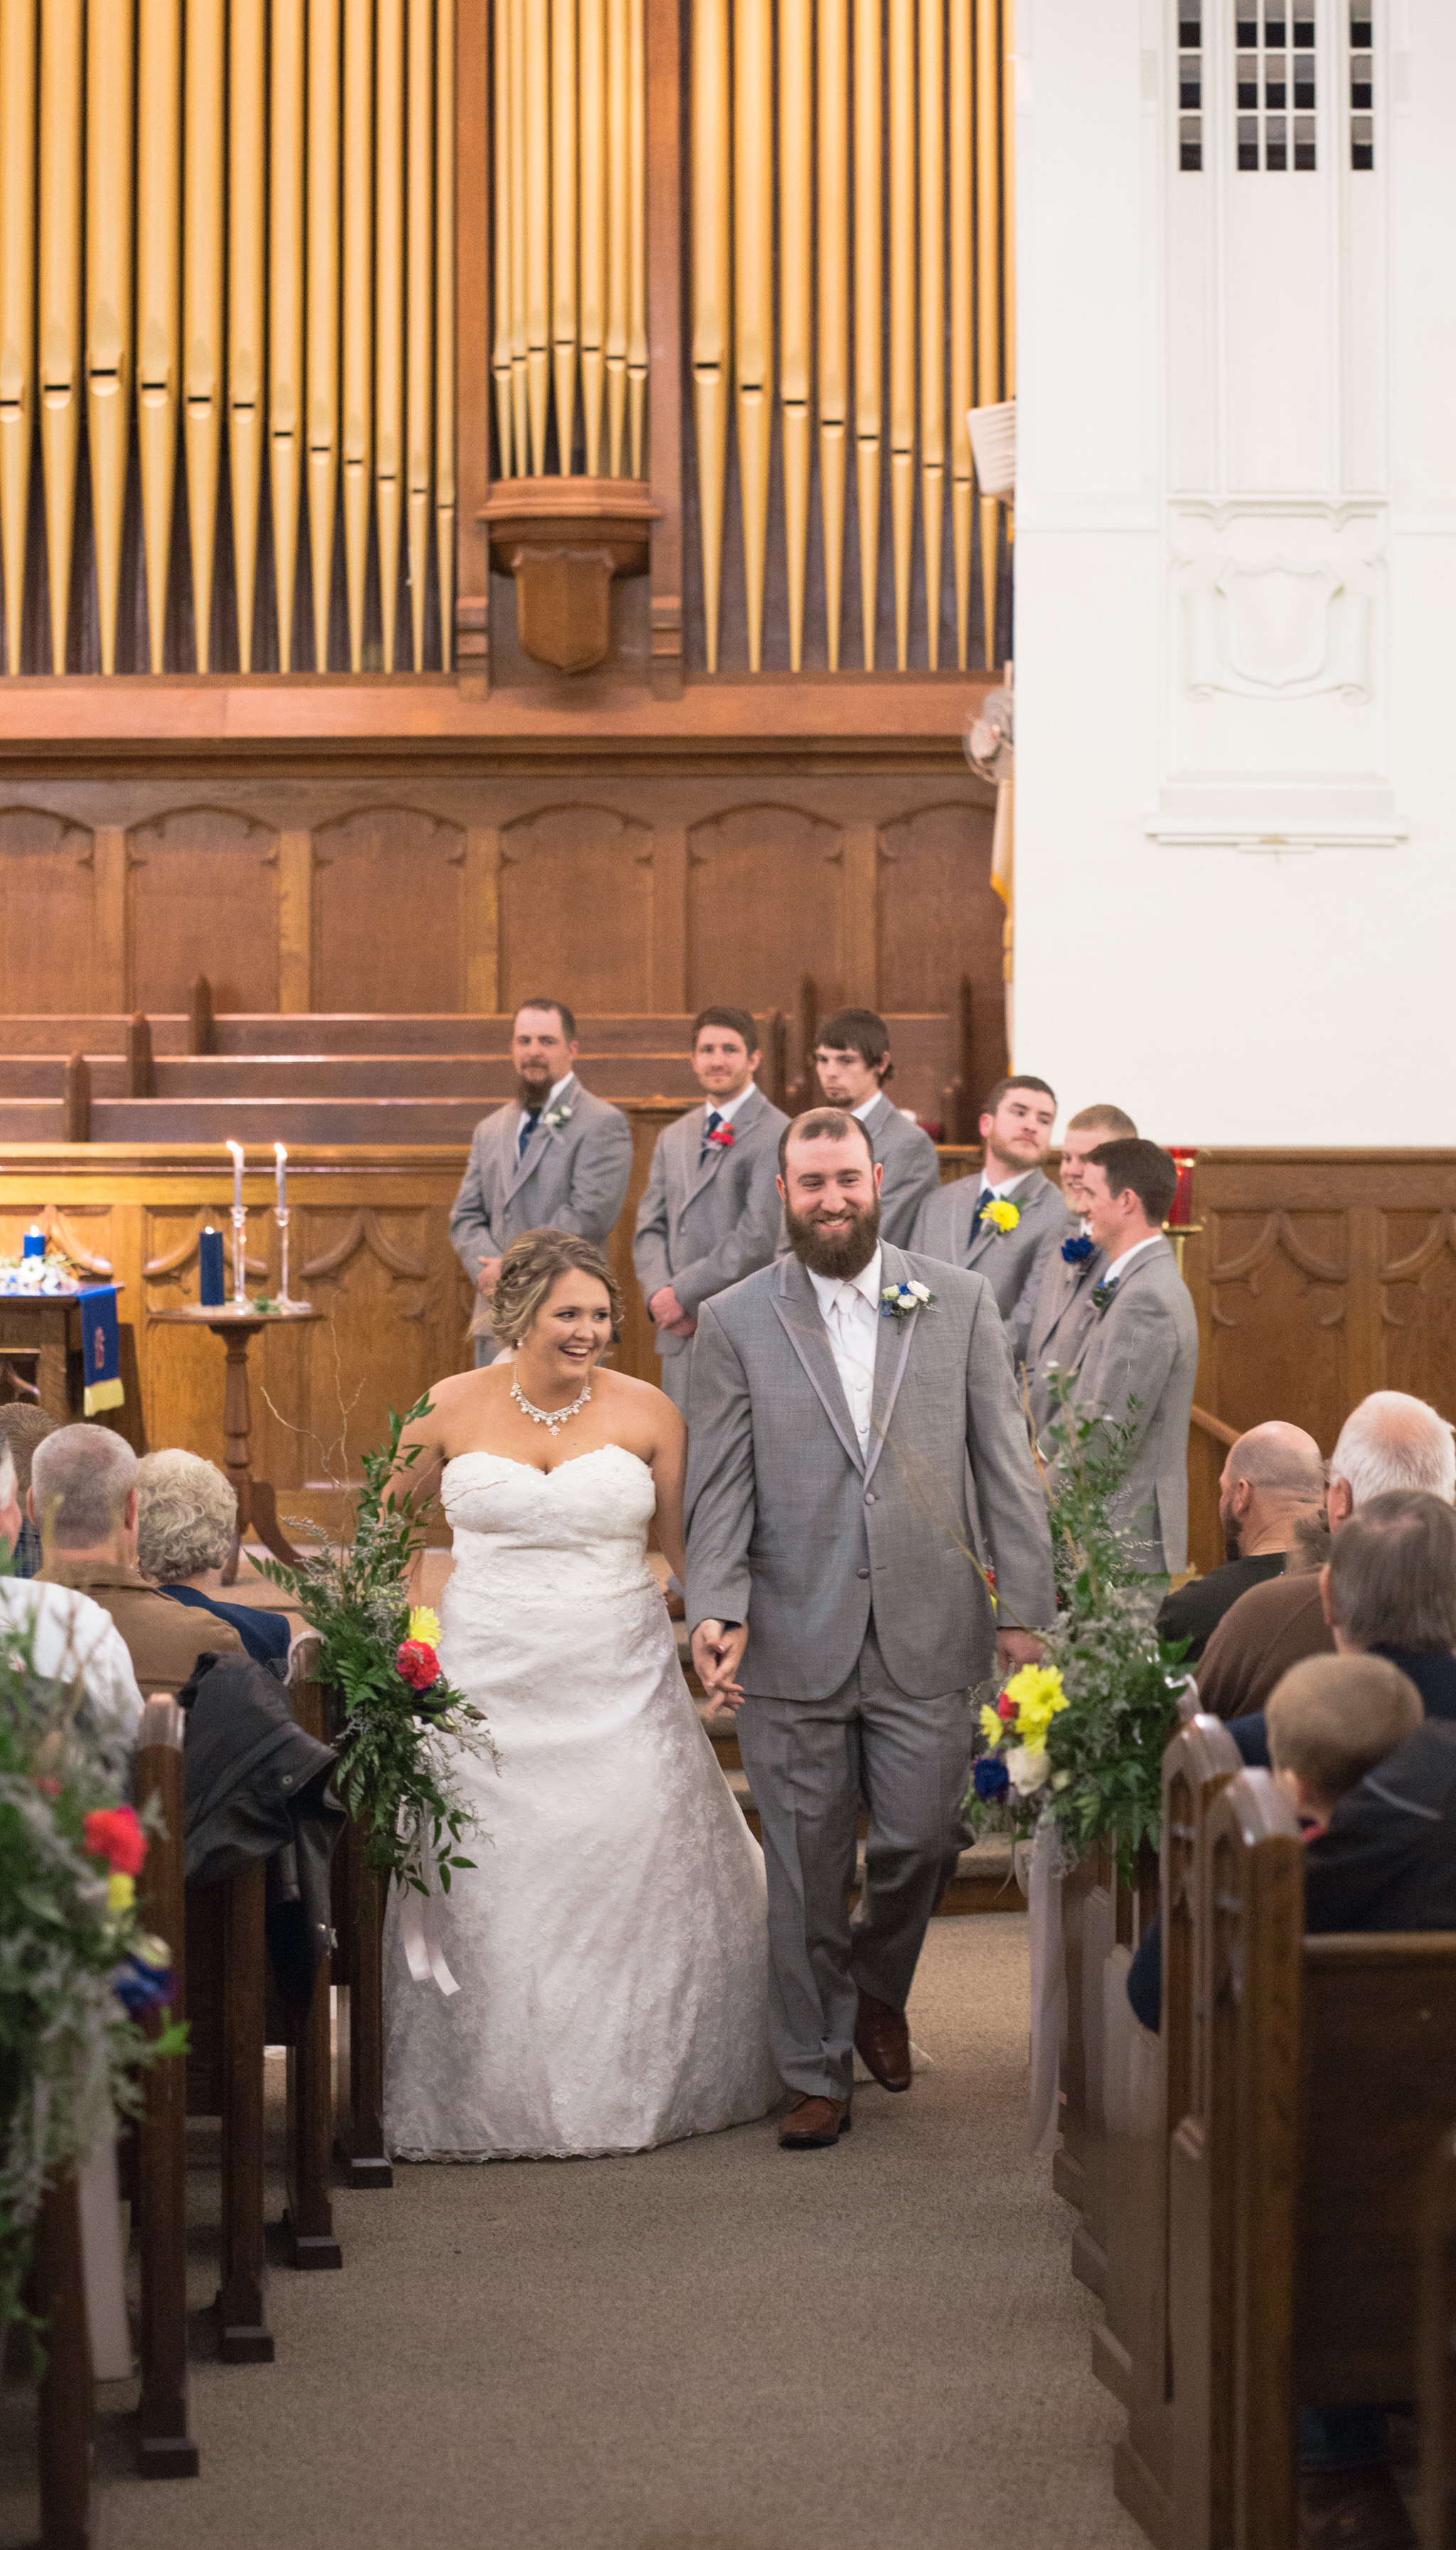 Zibell Spring Wedding, Bride and Groom, Powerful, Connected, Exploration, Laura Duggleby Photography -130.JPG